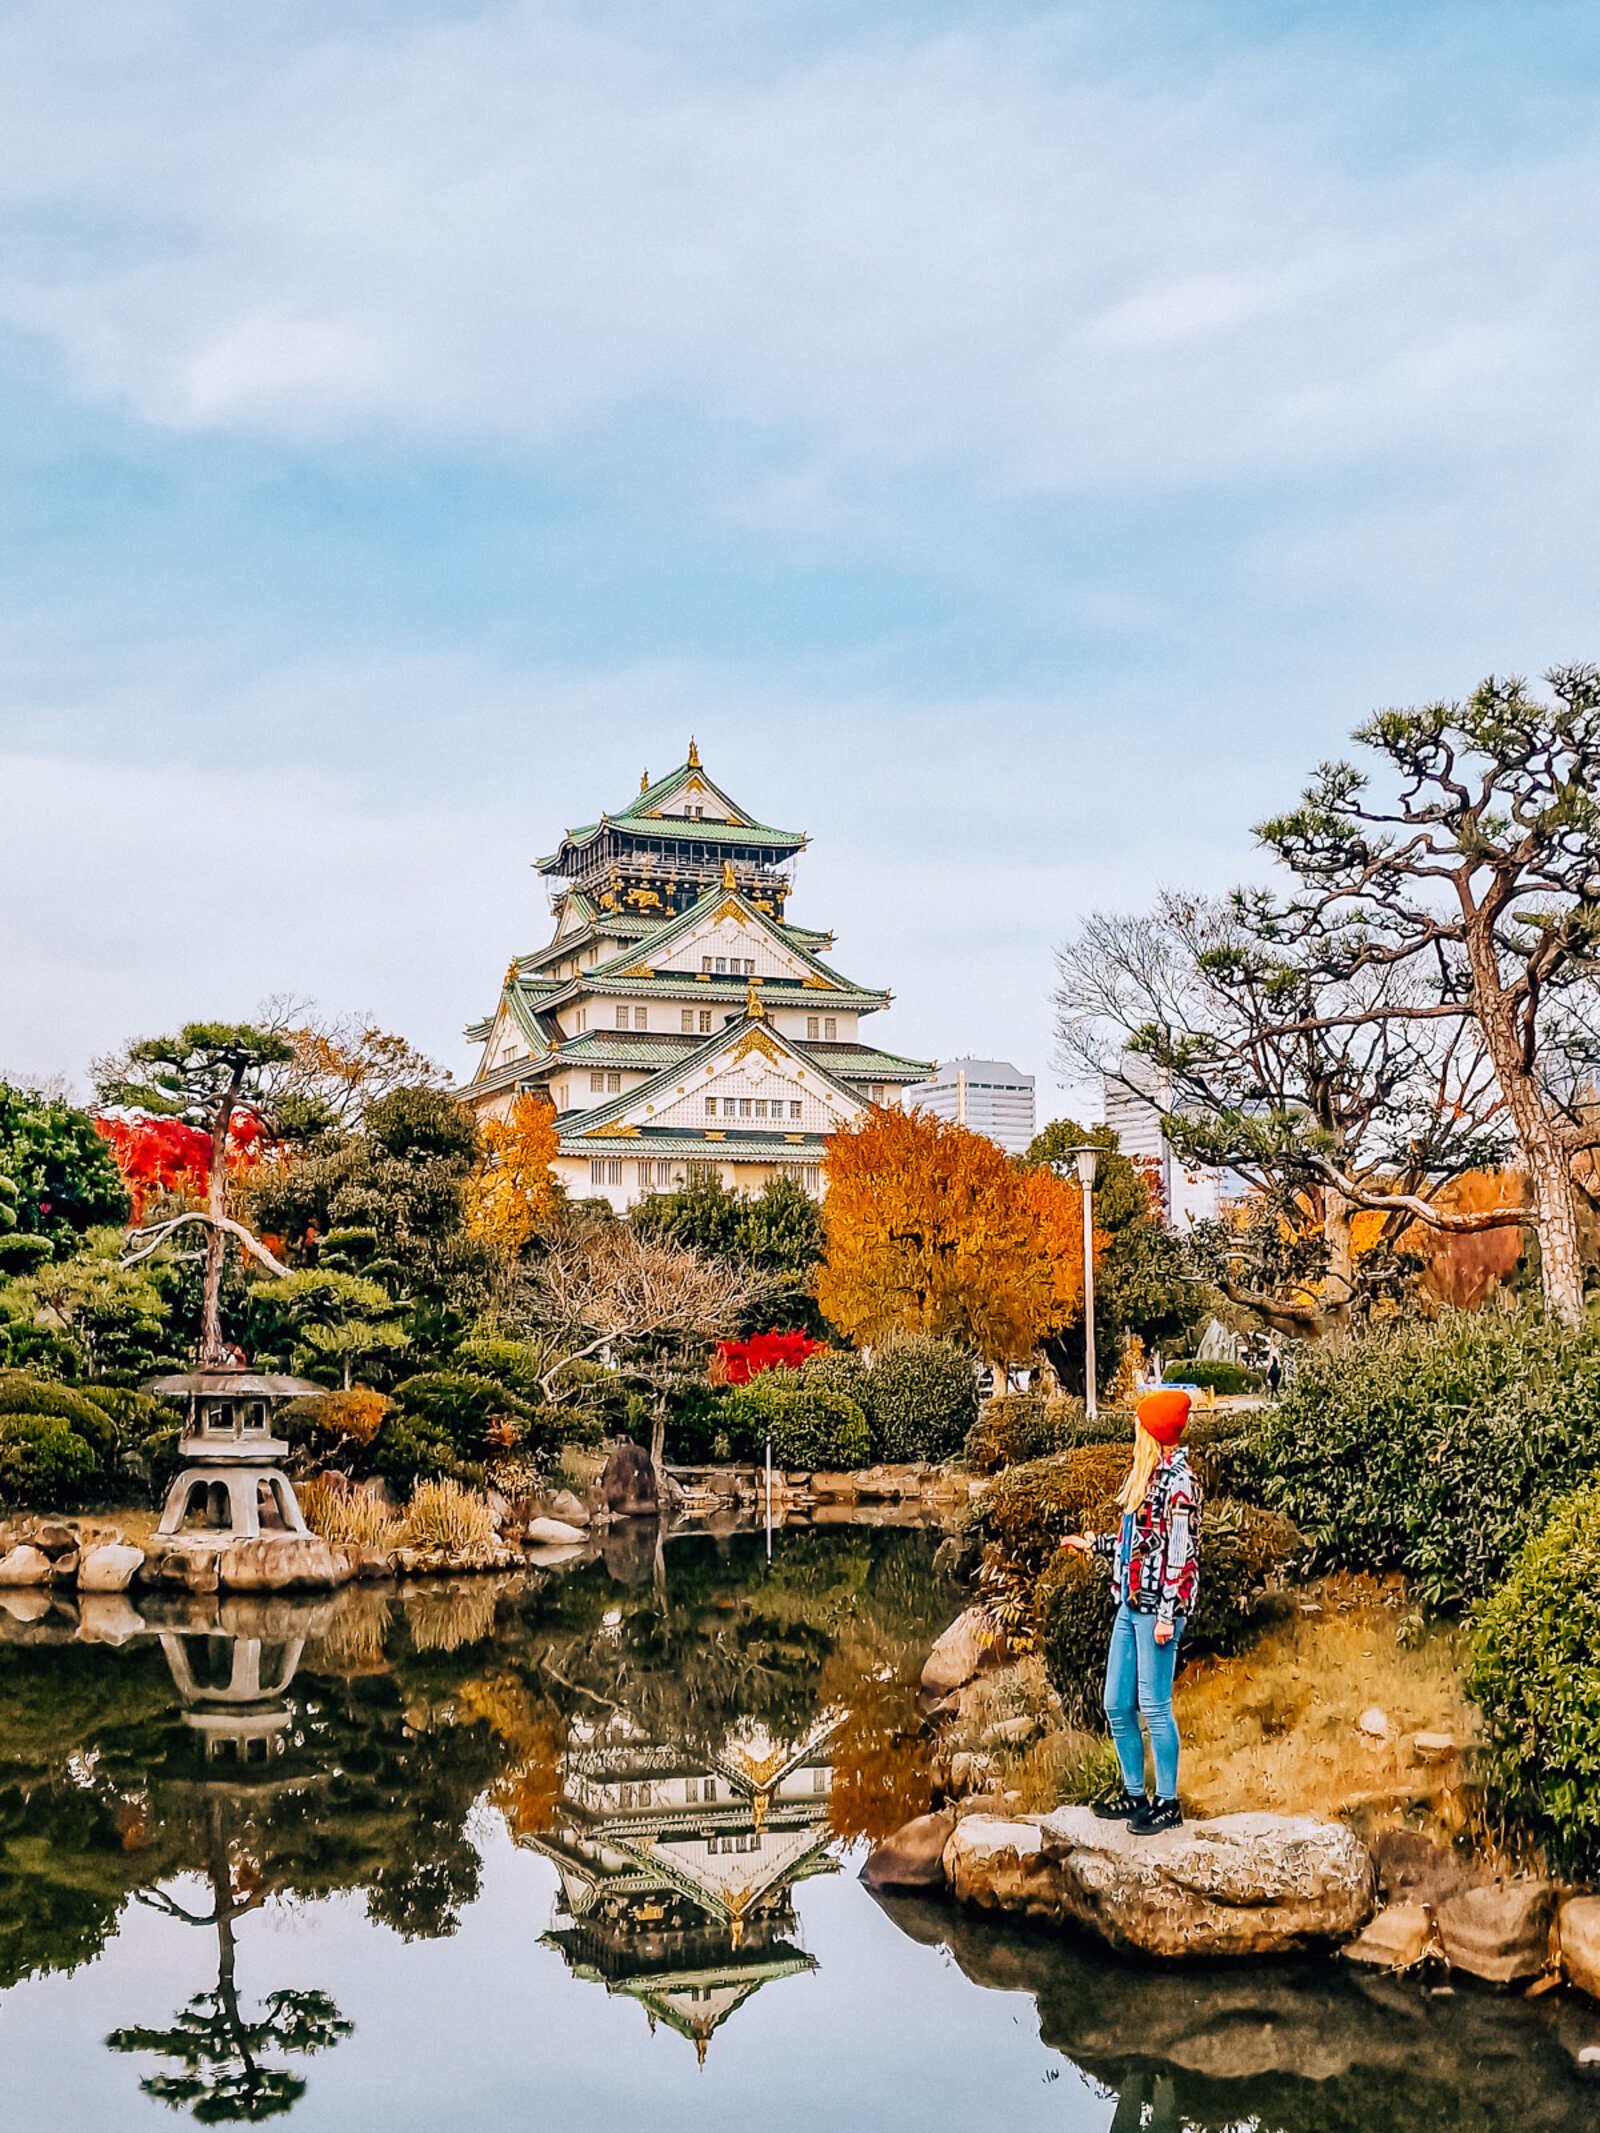 Helena standing on the rock on the edge of a pond in a Japanese garden, a Japanese castle is seen towering above the trees with white walls and green and gold roof.  It is reflected in the pond along with the autumn foliage in the garden